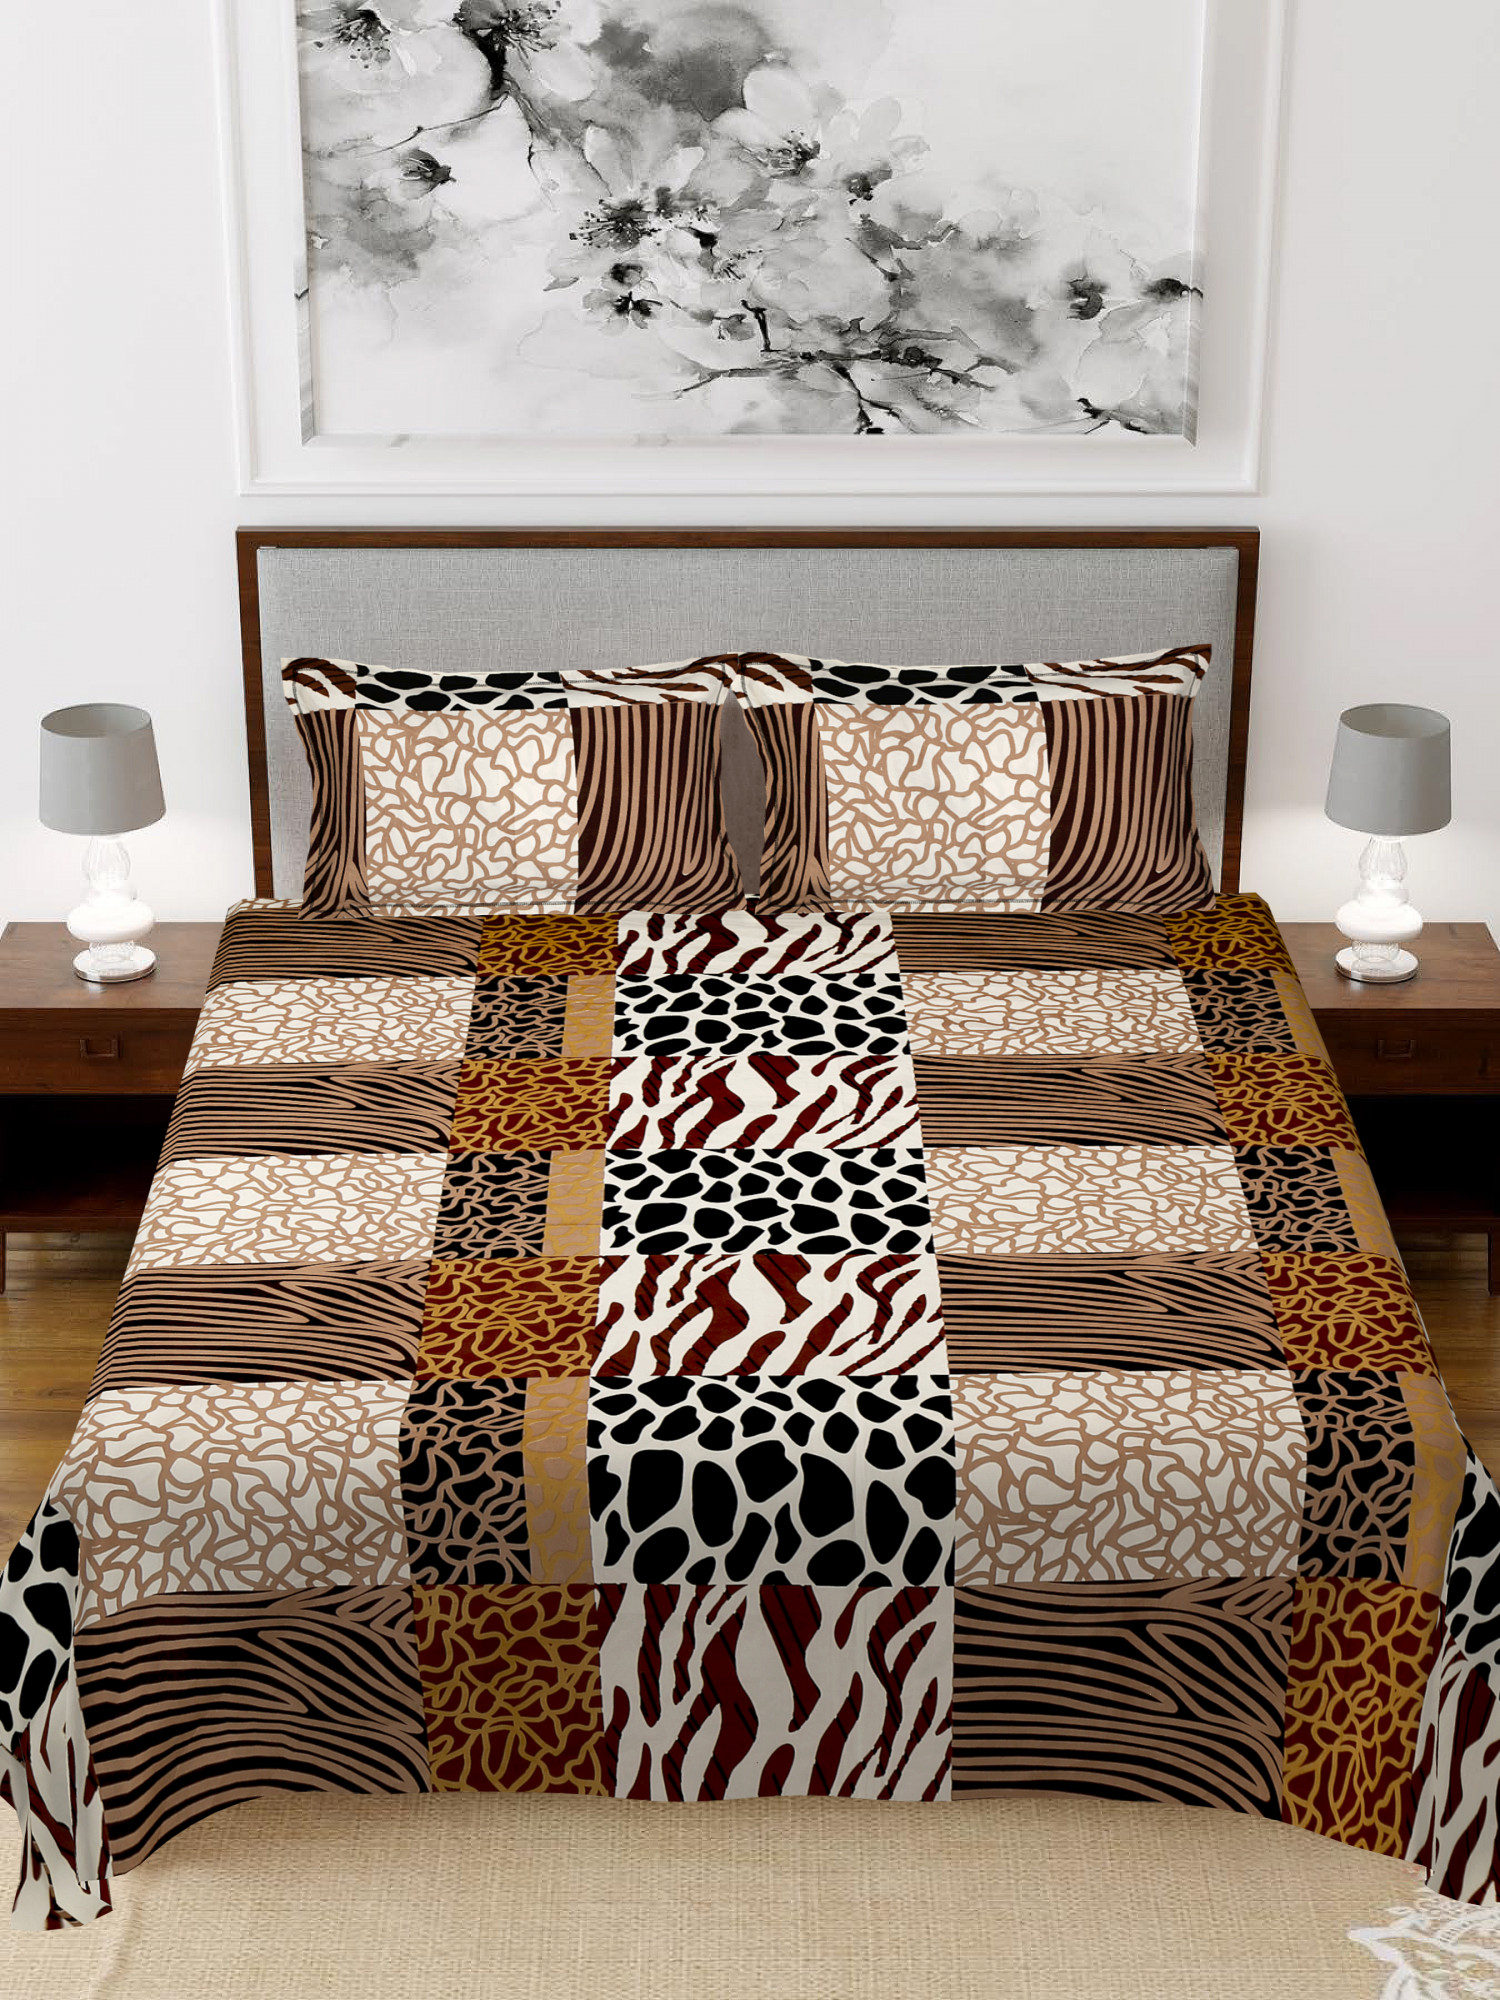 Kuber Industries Stone Print Glace Cotton 144 TC King Size Double Bedsheet with 2 Pillow Covers (Black & Brown)